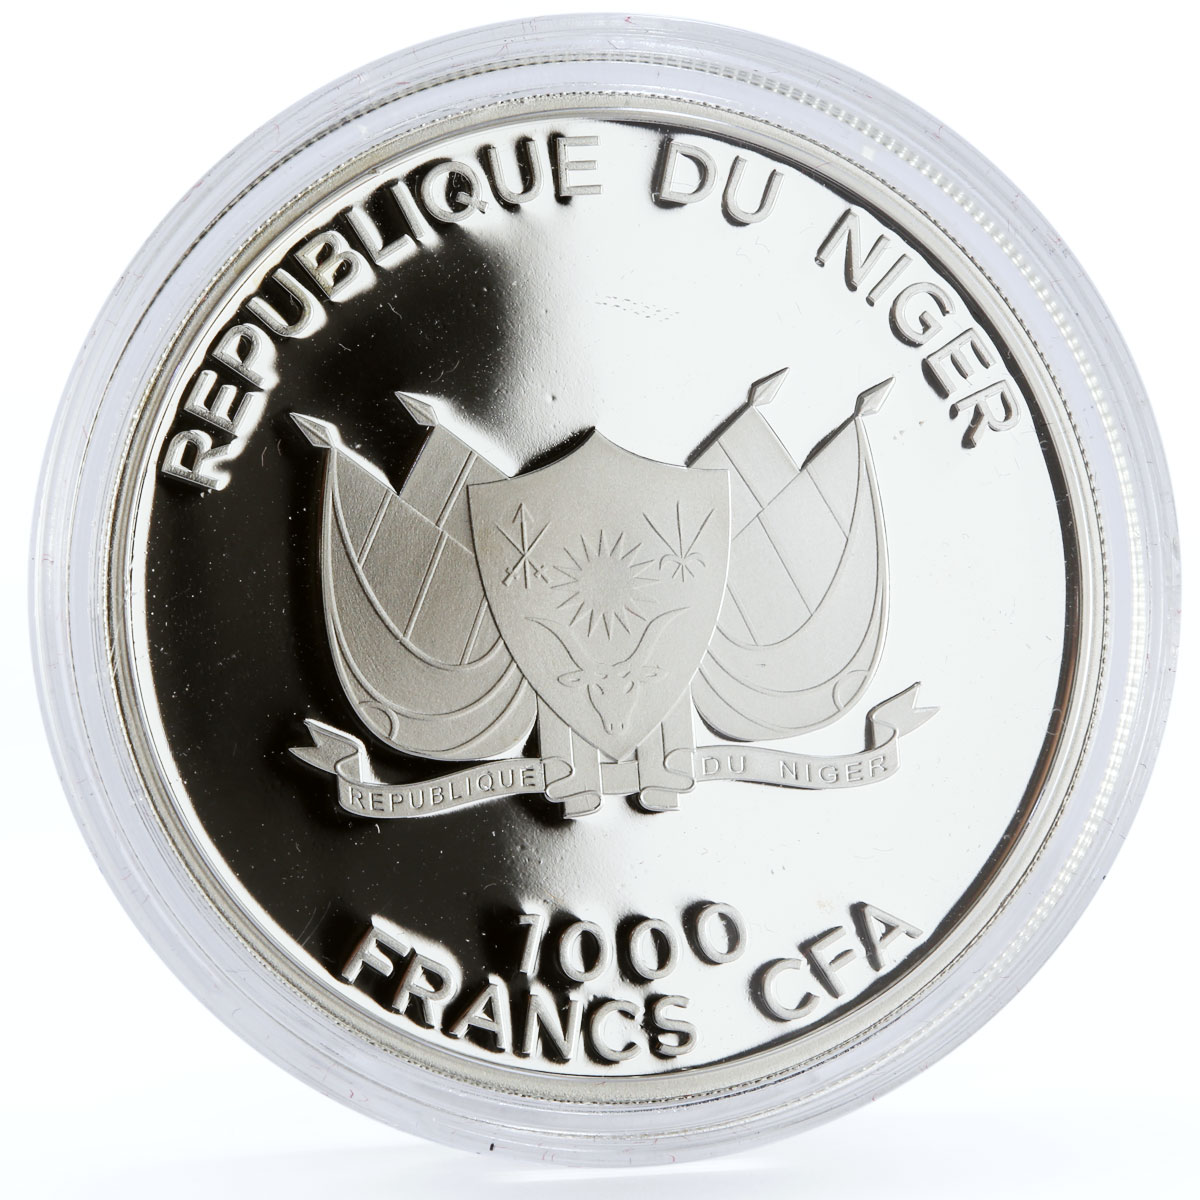 Niger 1000 francs Holy Quran Muslims Kaaba Islam Religion silver coin 2012